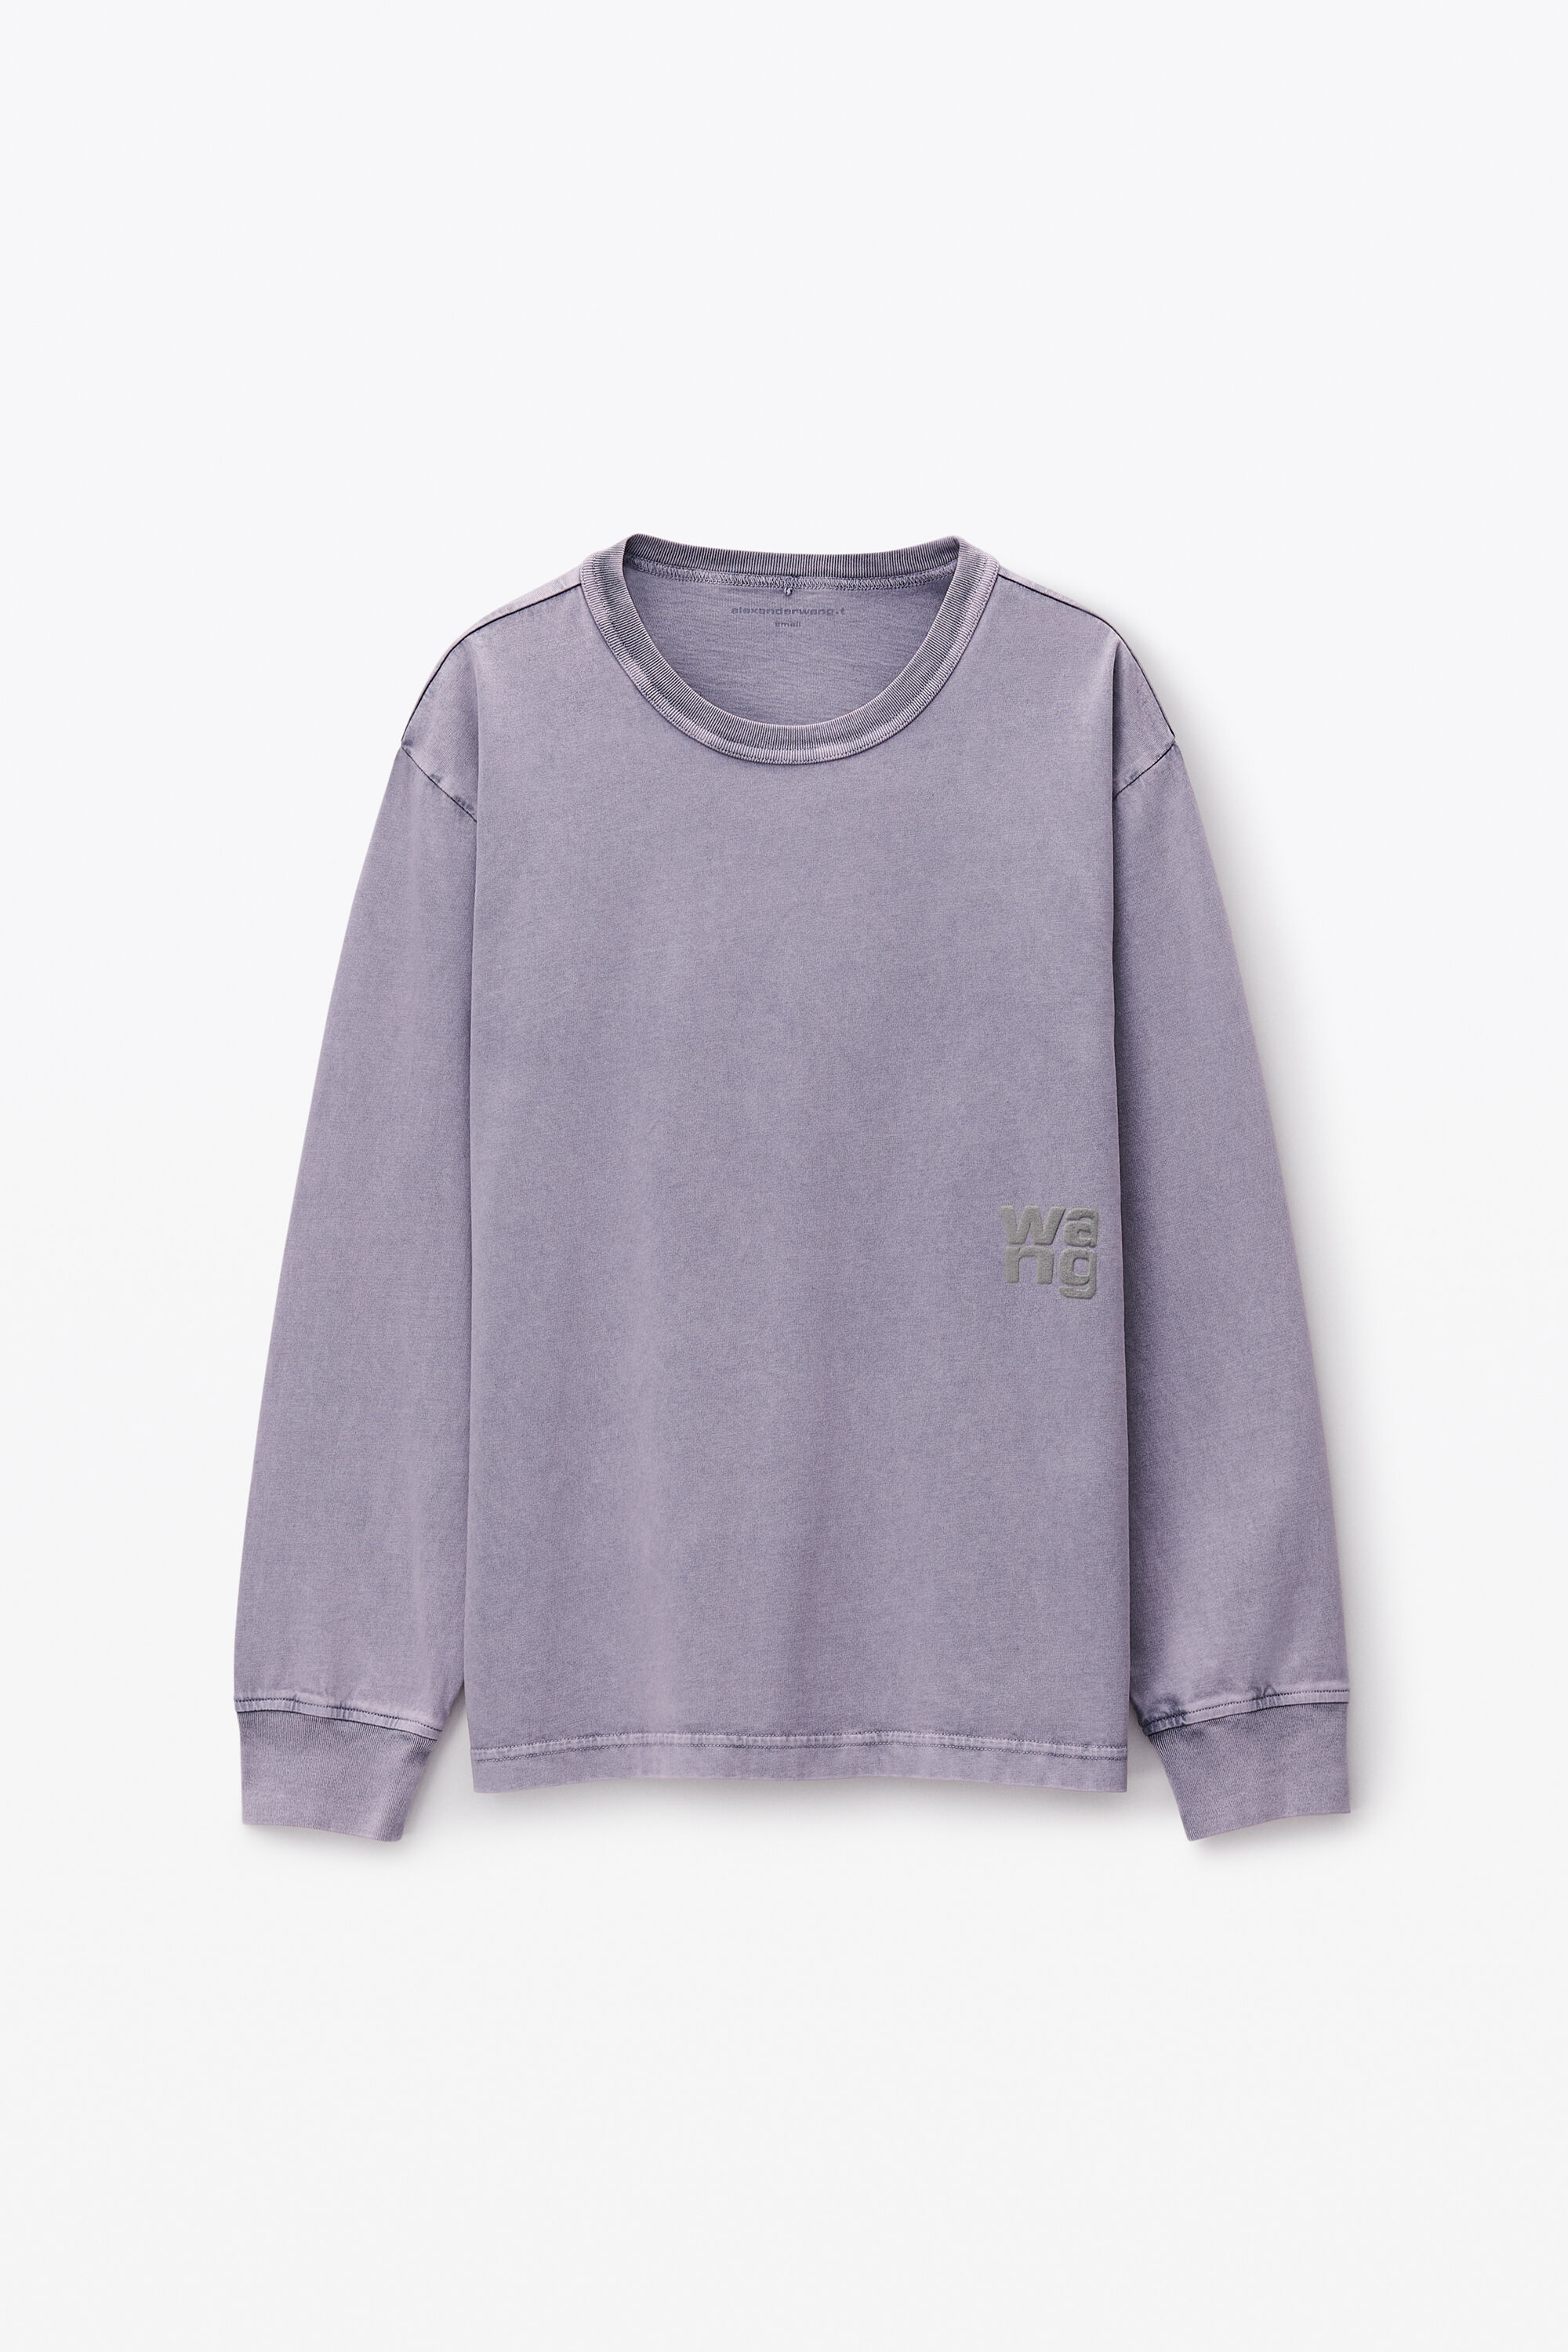 Logo Long Sleeve Tee in Cotton Jersey in ACID PINK LAVENDER 